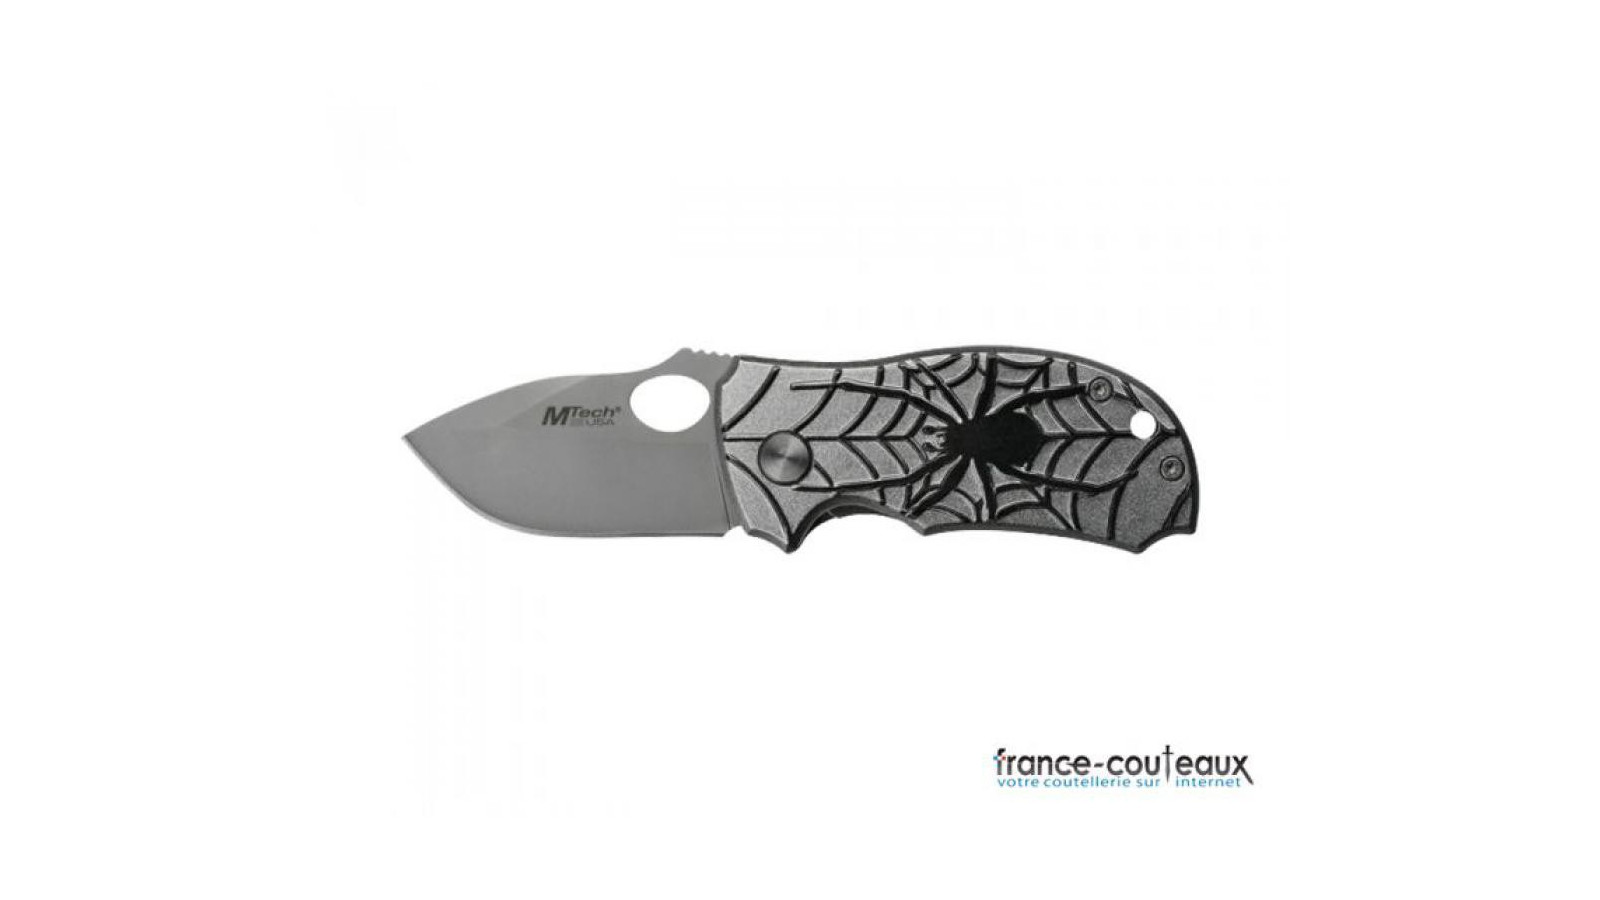 Couteau MTech USA Spider